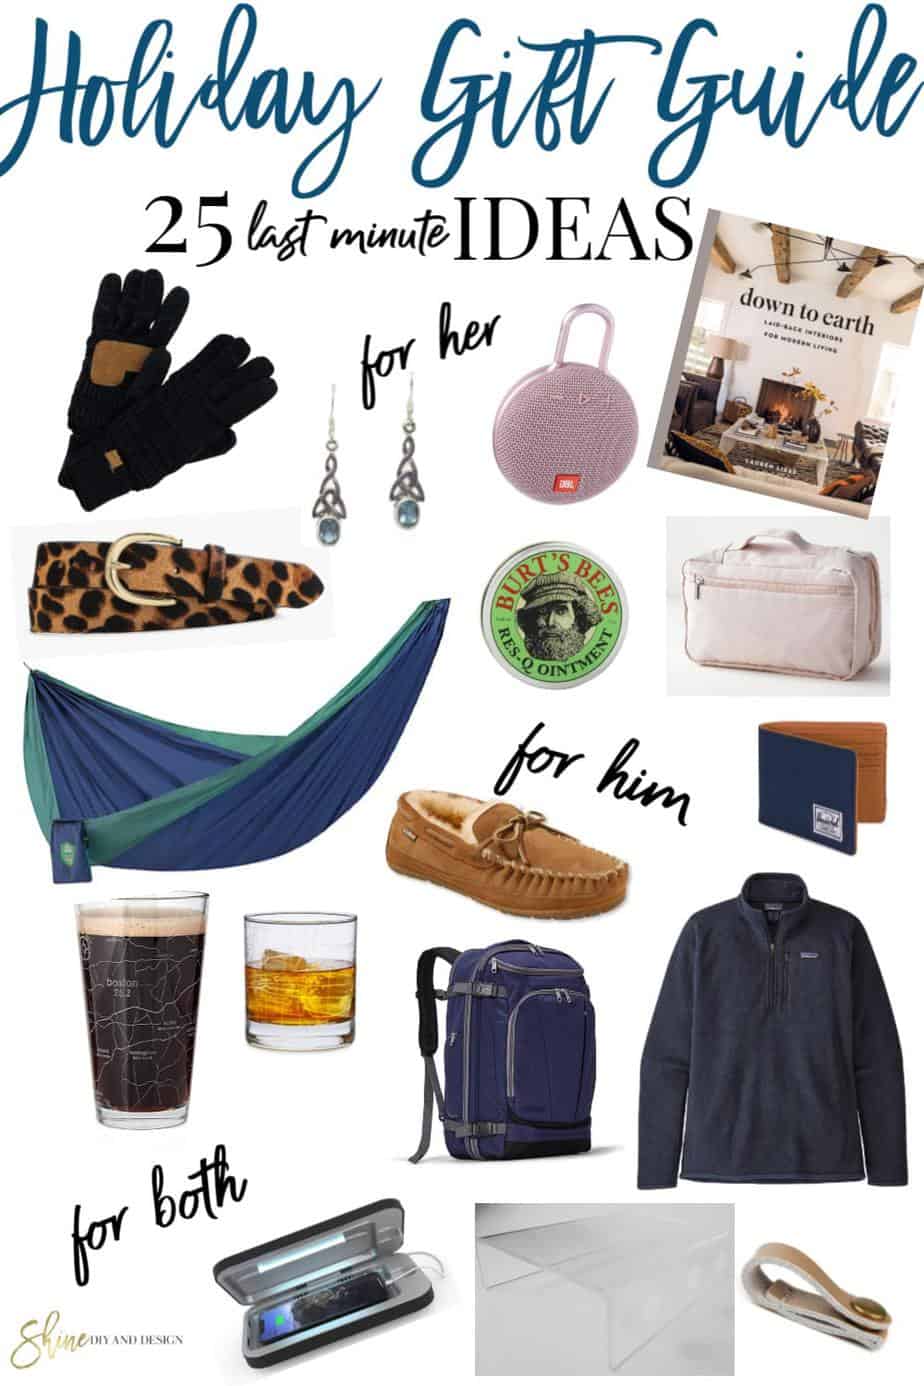 2019 Holiday Gift Guide | For Her • For Him • For Everyone